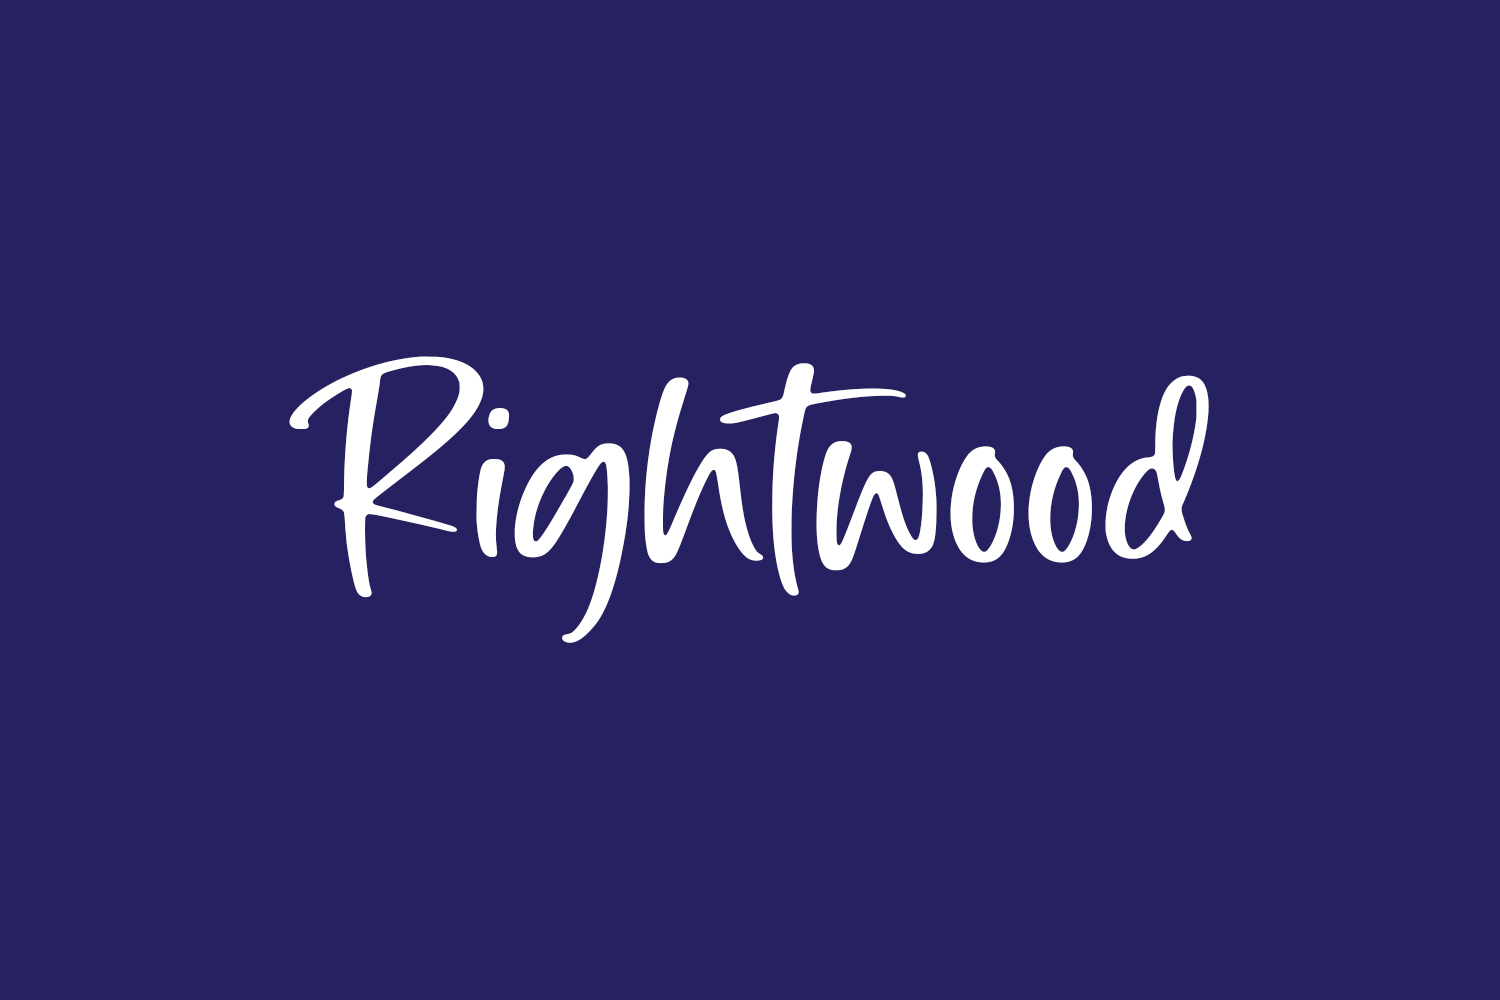 Free Rightwood Font